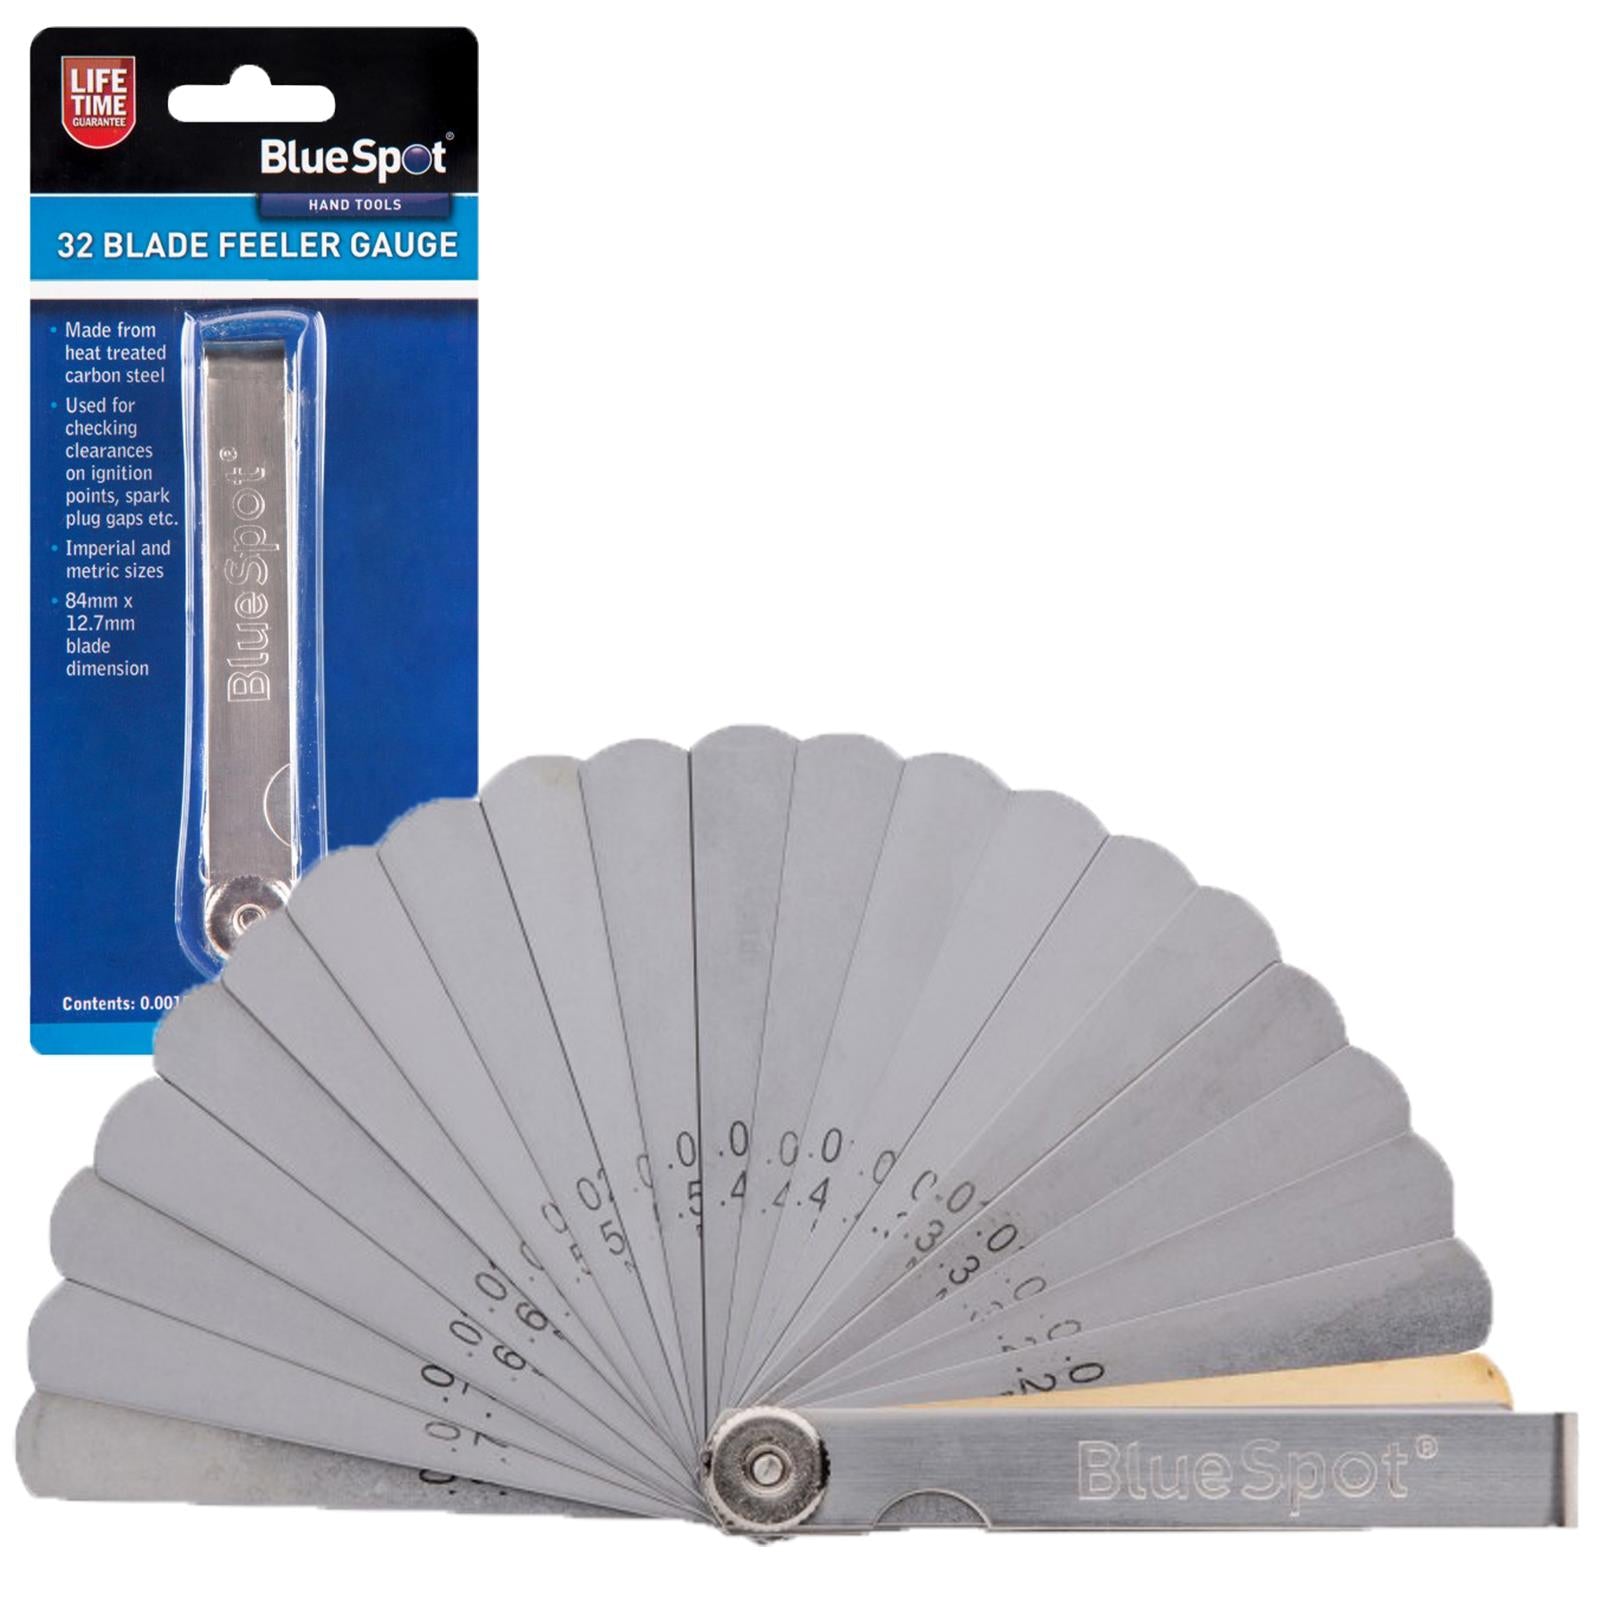 BlueSpot Feeler Gauge 32 Blade Metric and Imperial Sizes